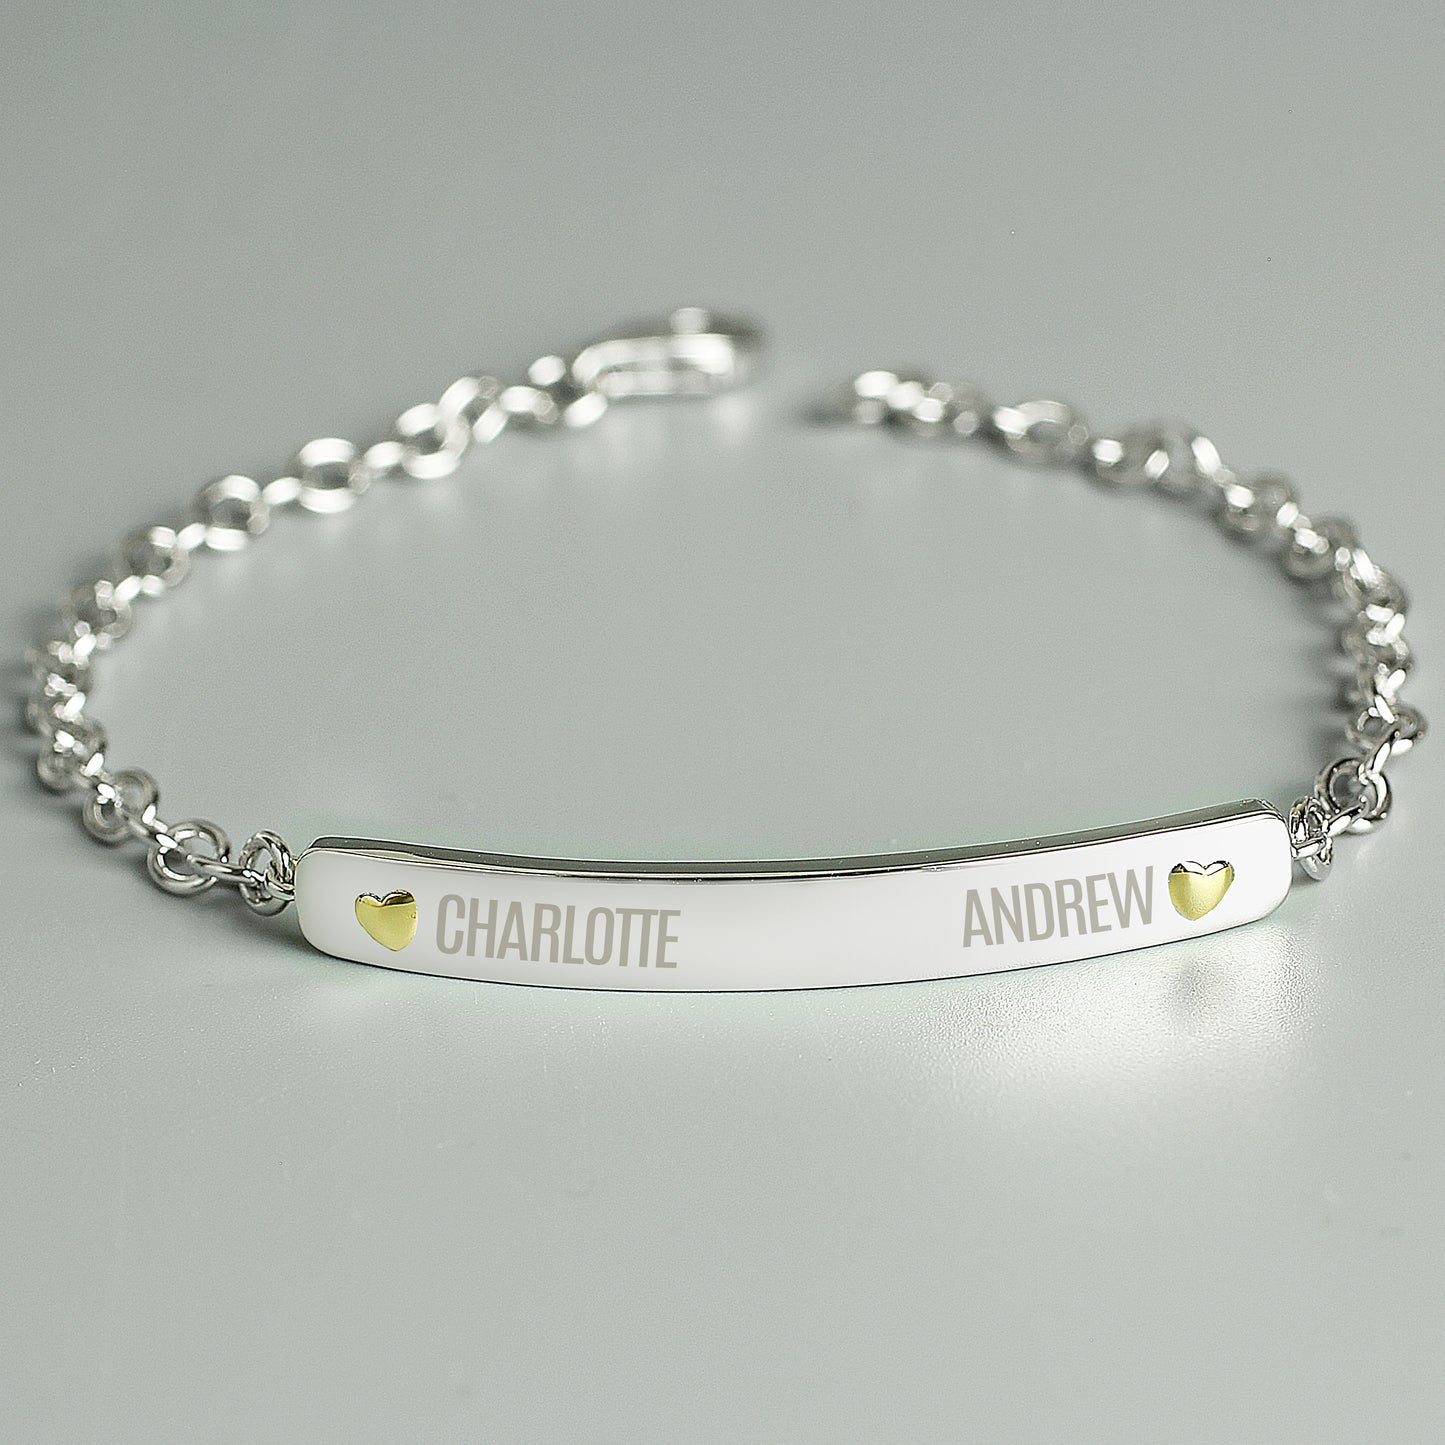 Personalised Two Names Sterling Silver and 9ct Gold Bar Bracelet - Personalise It!